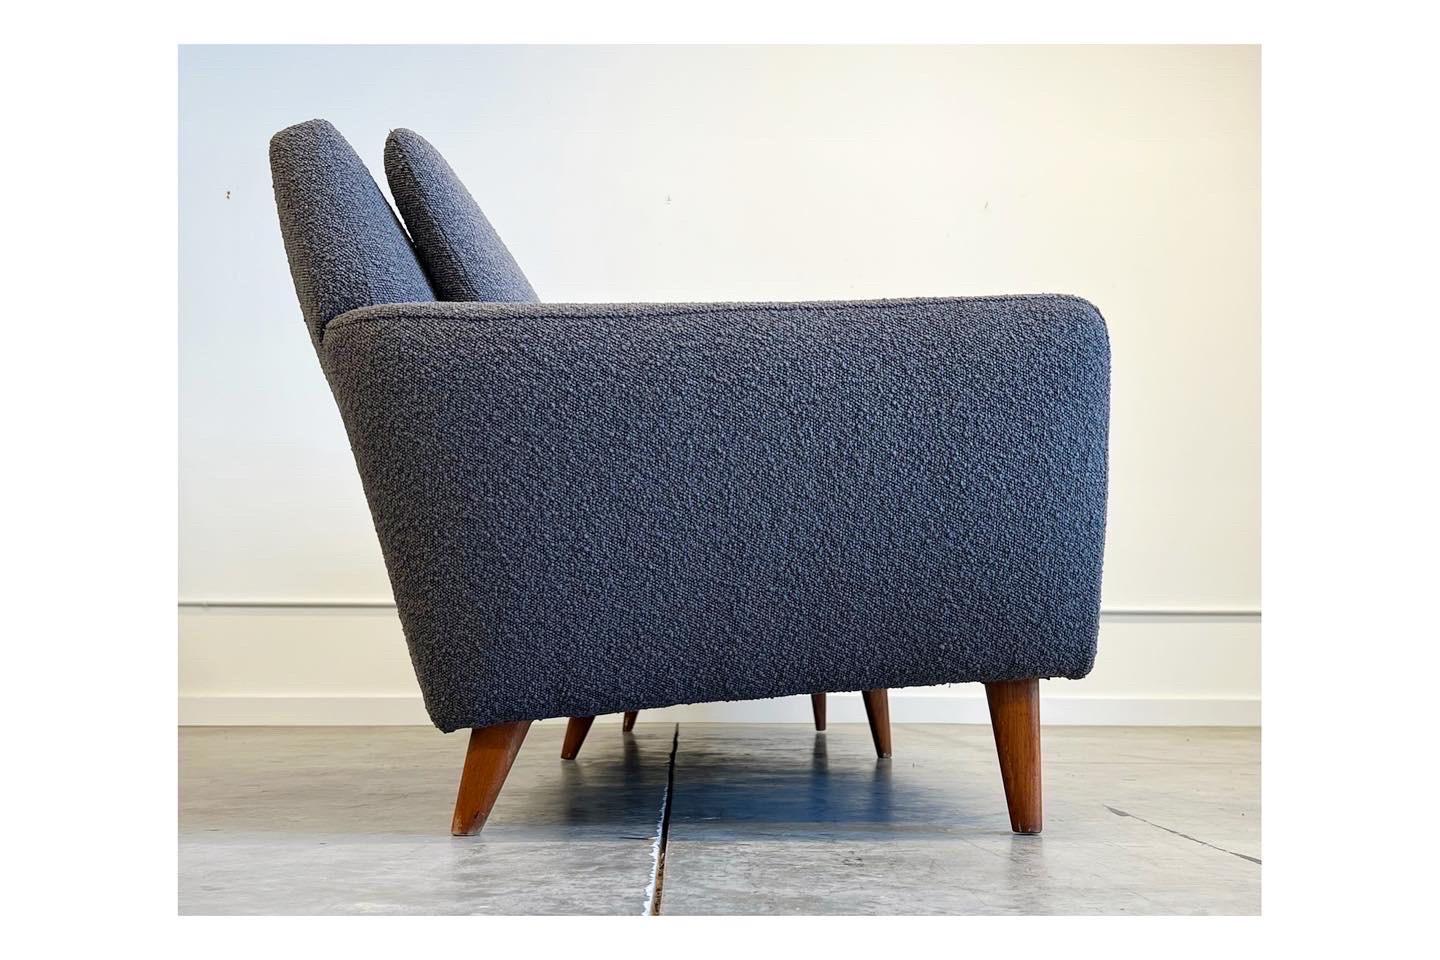 Modern with clean lines describes this mid century sofa designed by Folk Ohlsson for Dux. We reupholstered the sofa in a slate gray bouclé to update it for the modern home. It seats four and deserves to be enjoyed. Original tag.